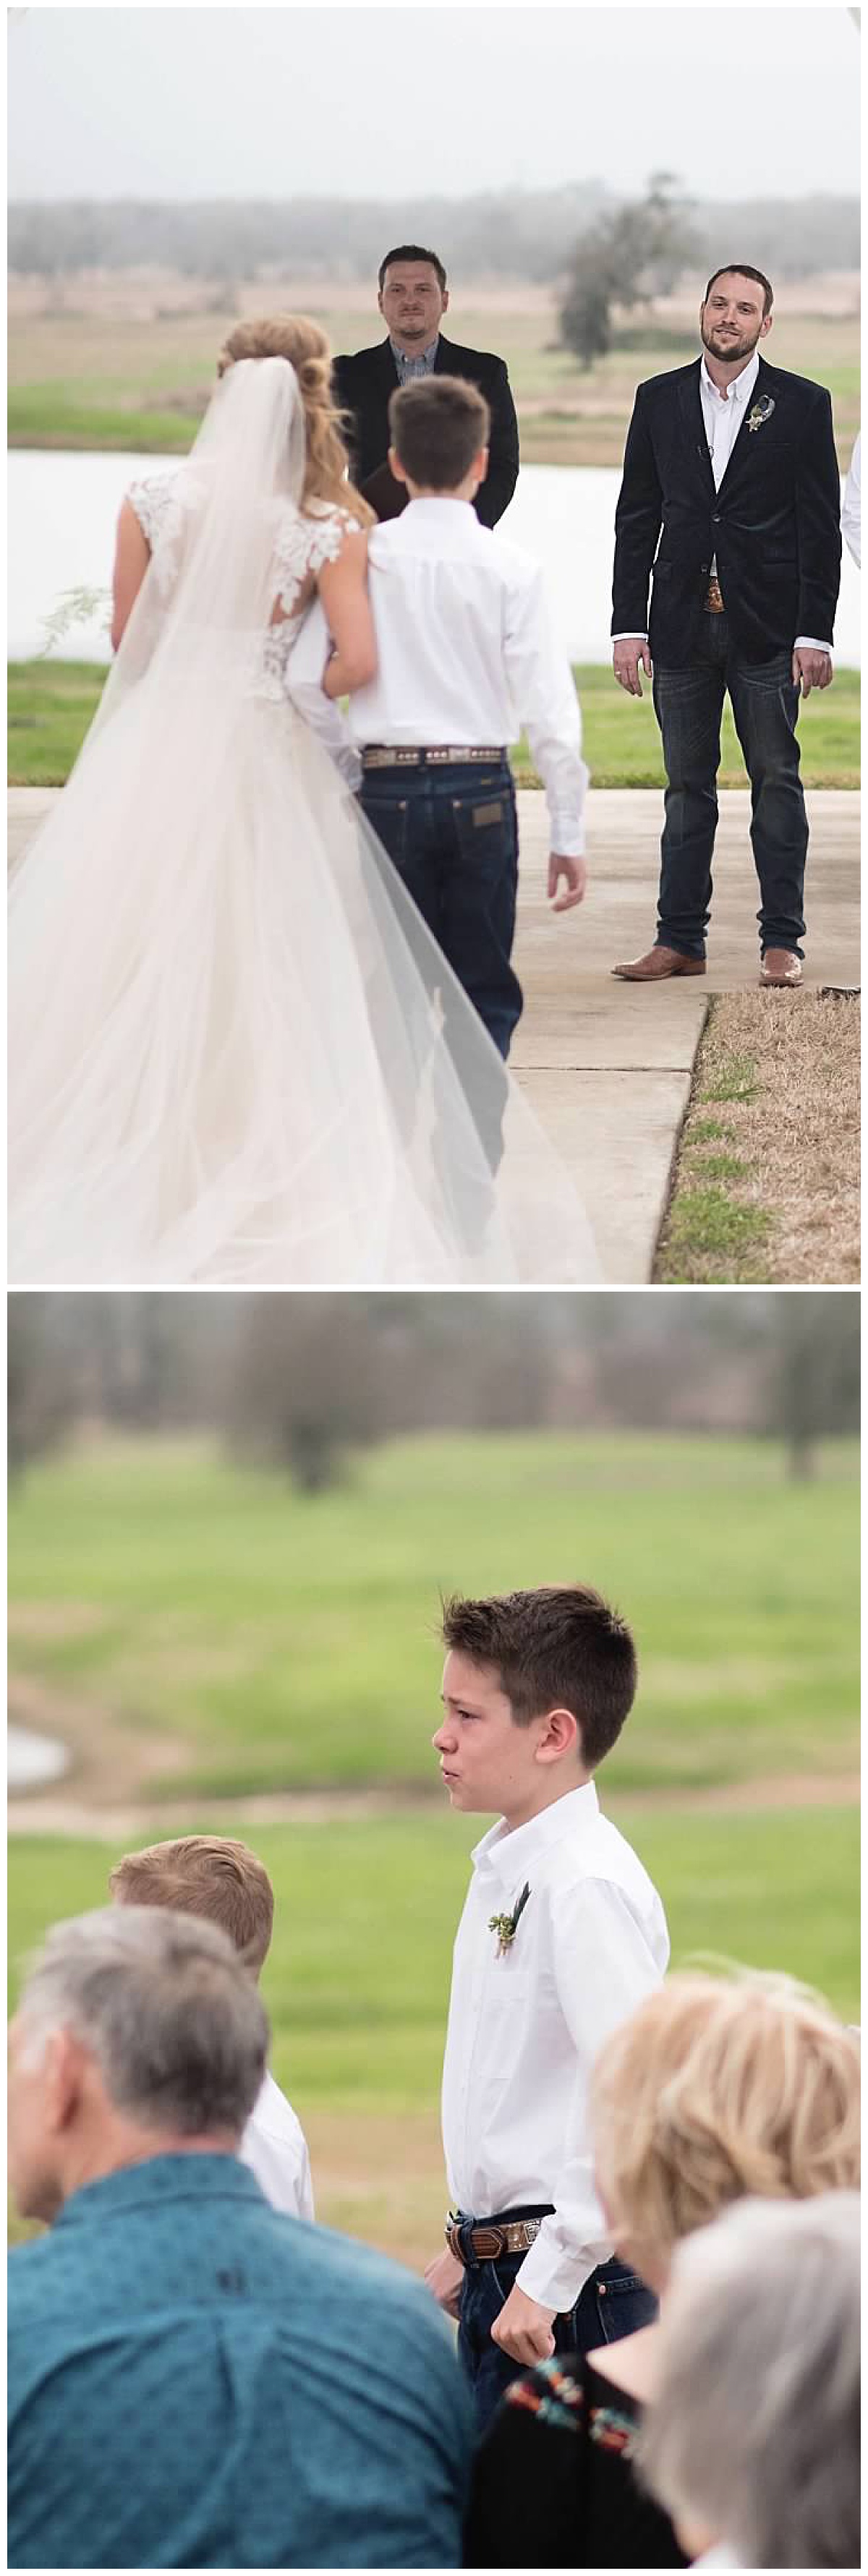 The Brides Nephew steps in as Presenter of the Bride at Texas Wedding Venue  in Bellville, TX 